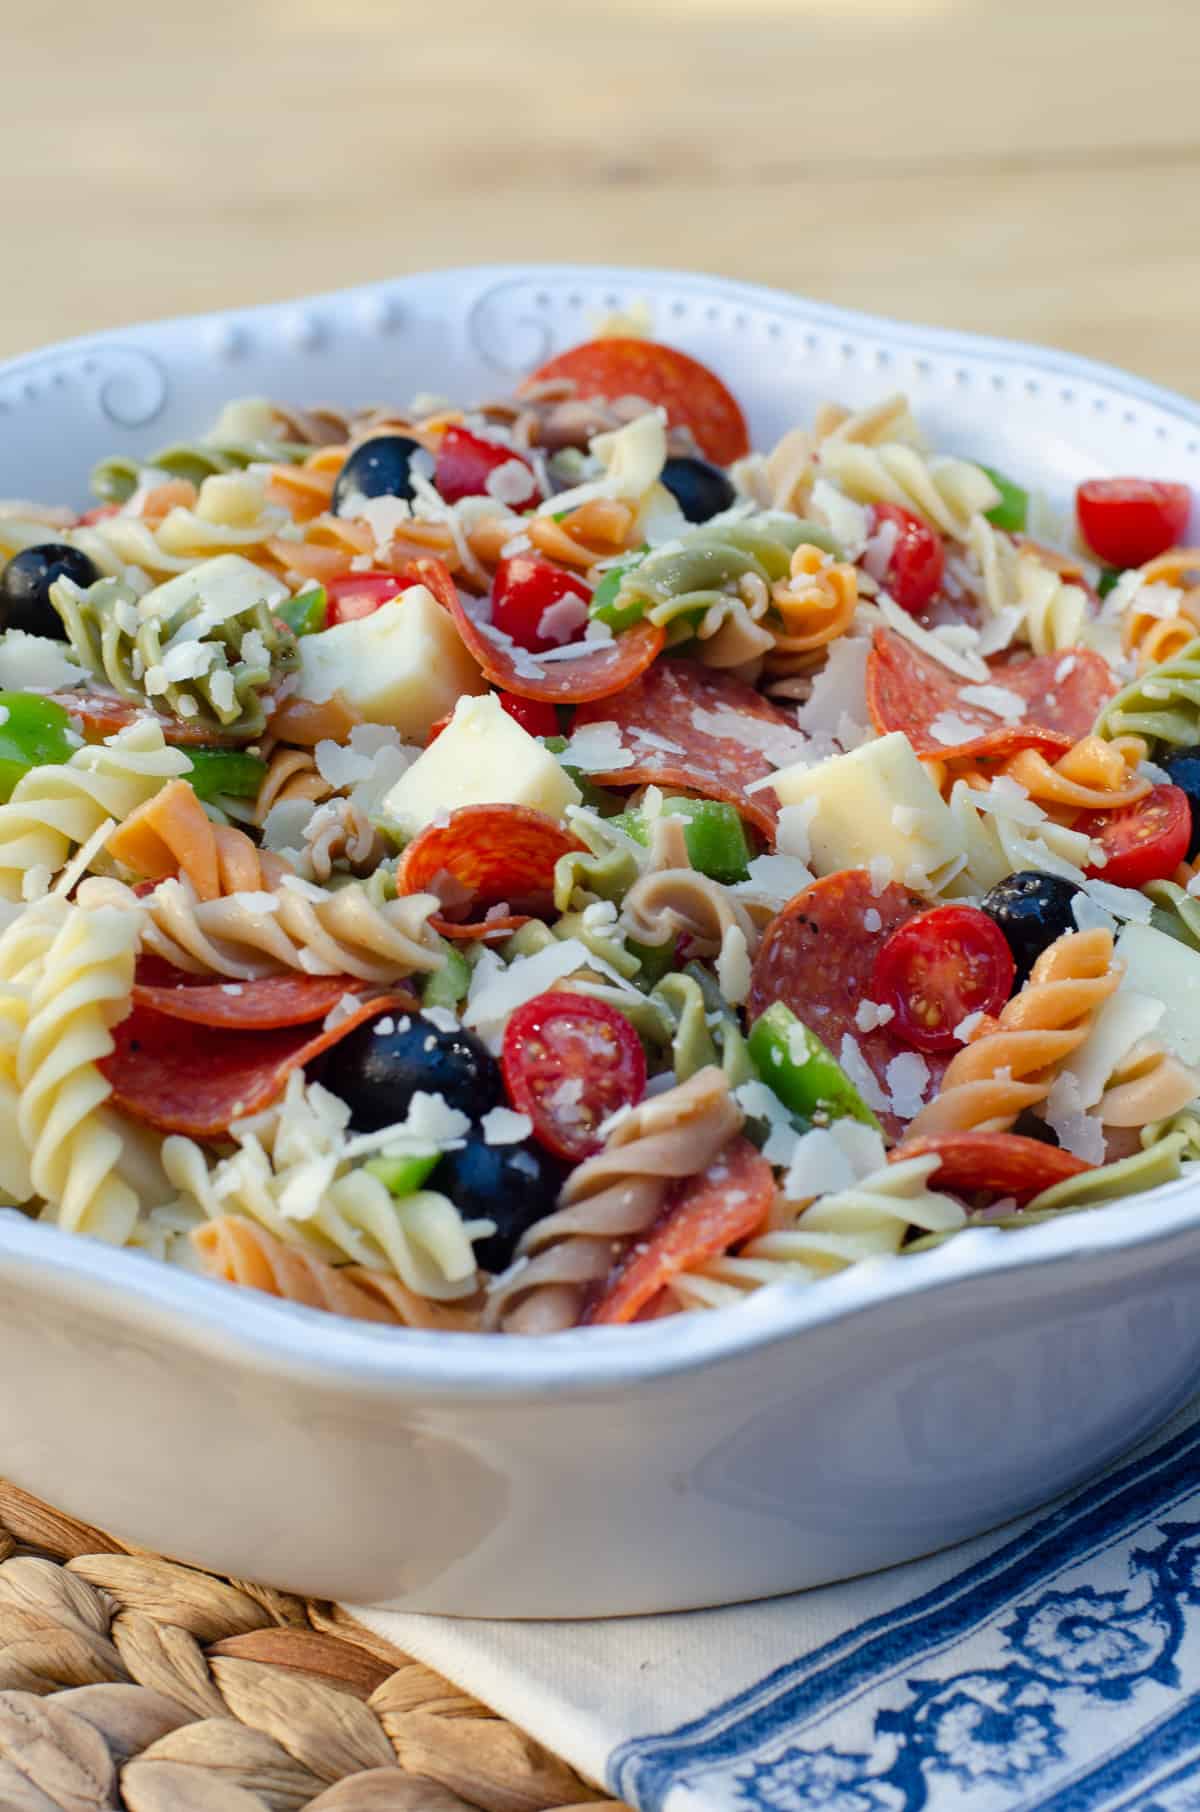 Pizza Pasta Salad in a white bowl on a blue and white cloth.